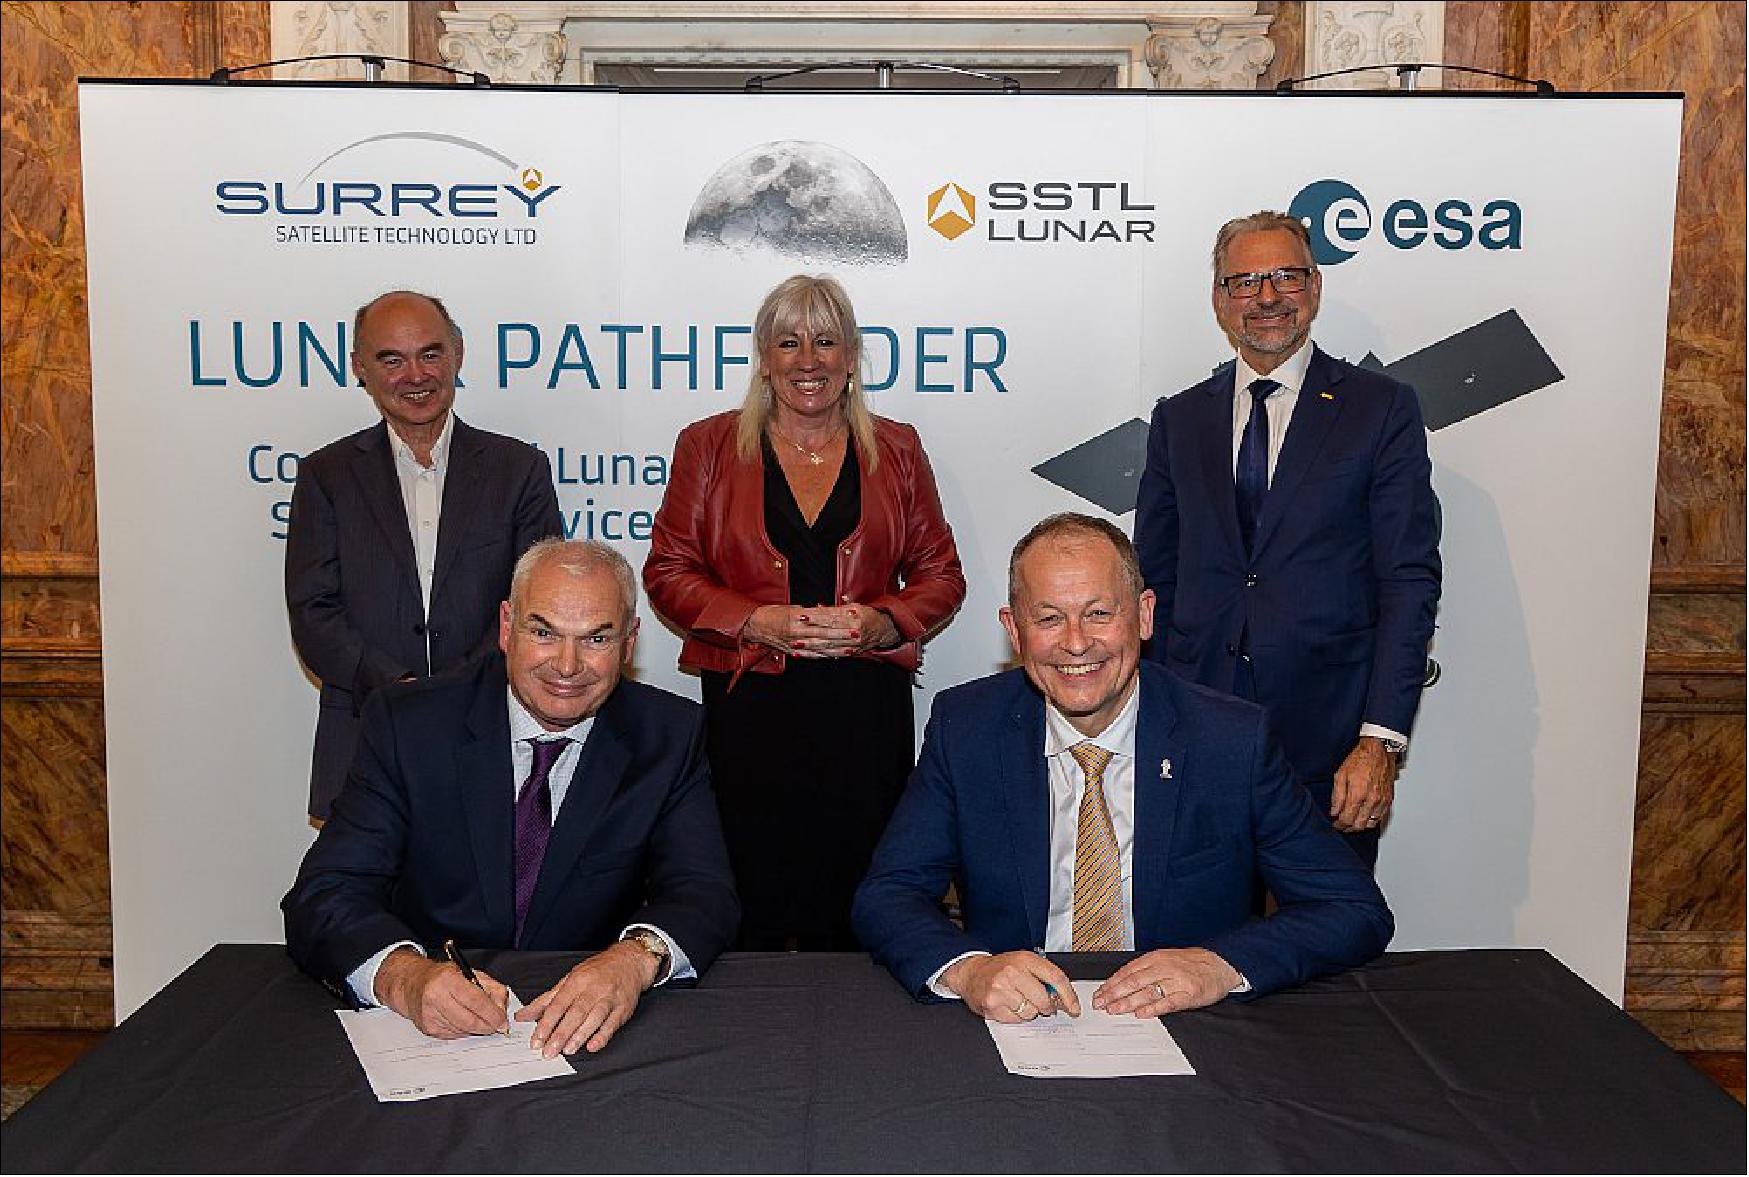 Figure 17: The Commercial Lunar Mission Support Services contract was signed between ESA’s Director of Human and Robotic Exploration, Dave Parker, and SSTL’s Managing Director, Phil Brownnett, on 15 September 2021 at The Royal Society in London. Amanda Solloway, UK Government Science Minister, Josef Aschbacher, ESA’s Director General, Paul Bate, Director of the UK Space Agency, and SSTL’s Executive Chairman, Sir Martin Sweeting were also in attendance (image credit: SSTL)